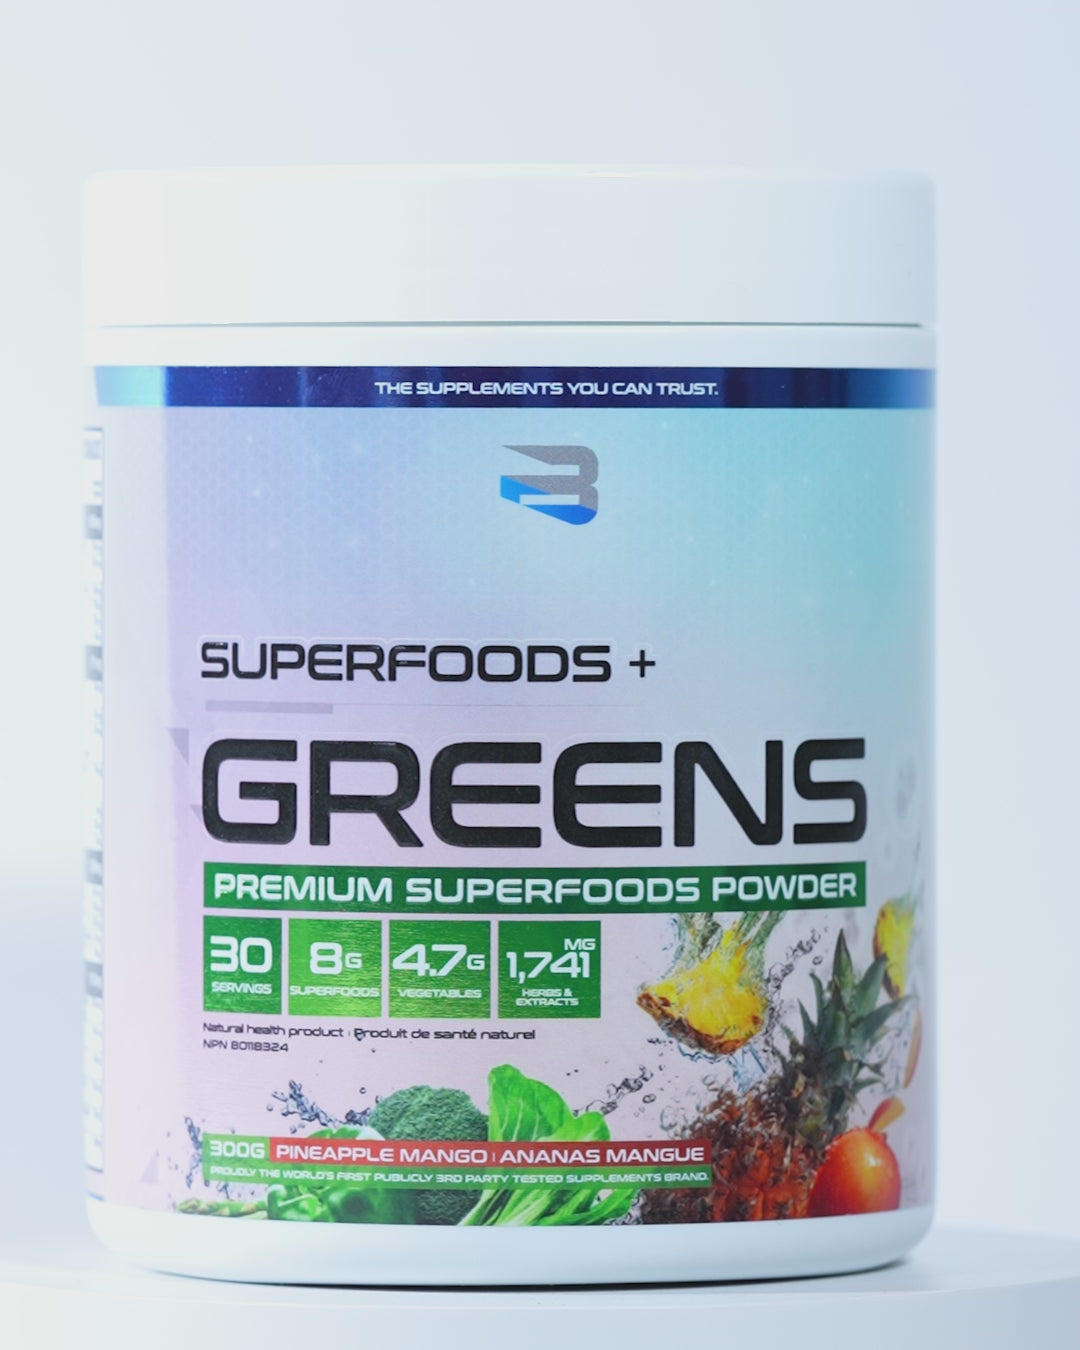 Superfoods and greens supplements